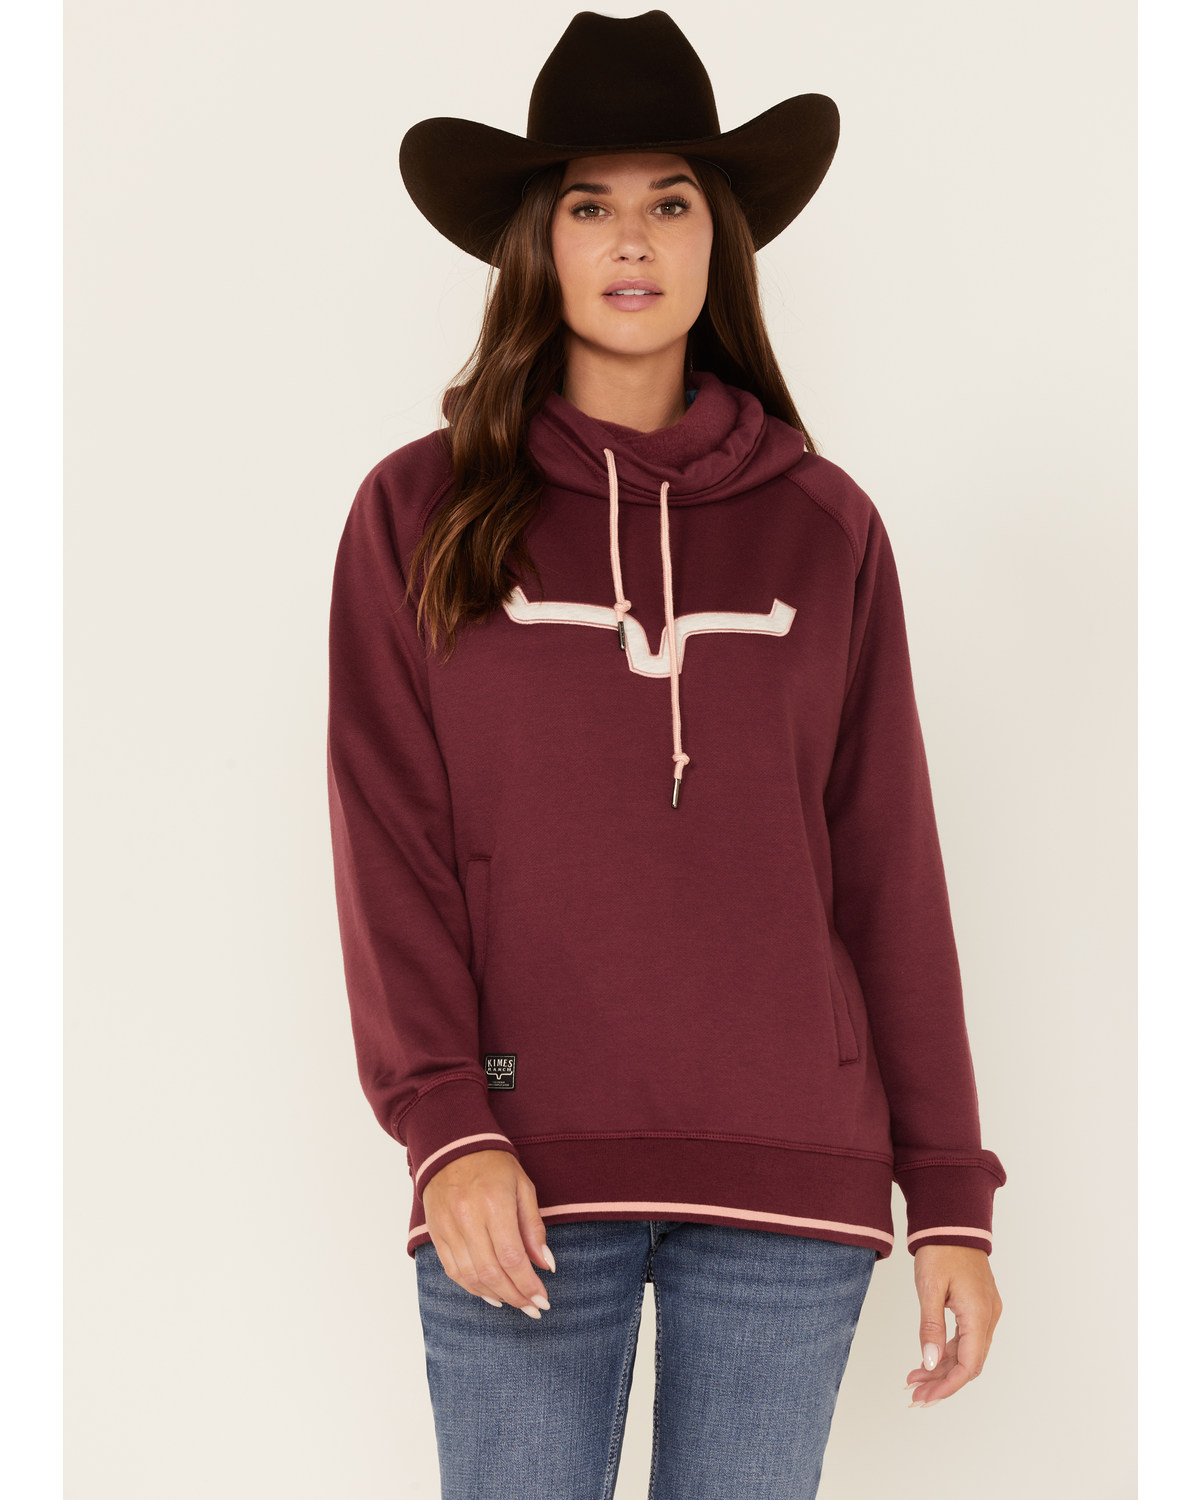 Kimes Ranch Women's Boot Barn Exclusive Logo Embroidered Hoodie